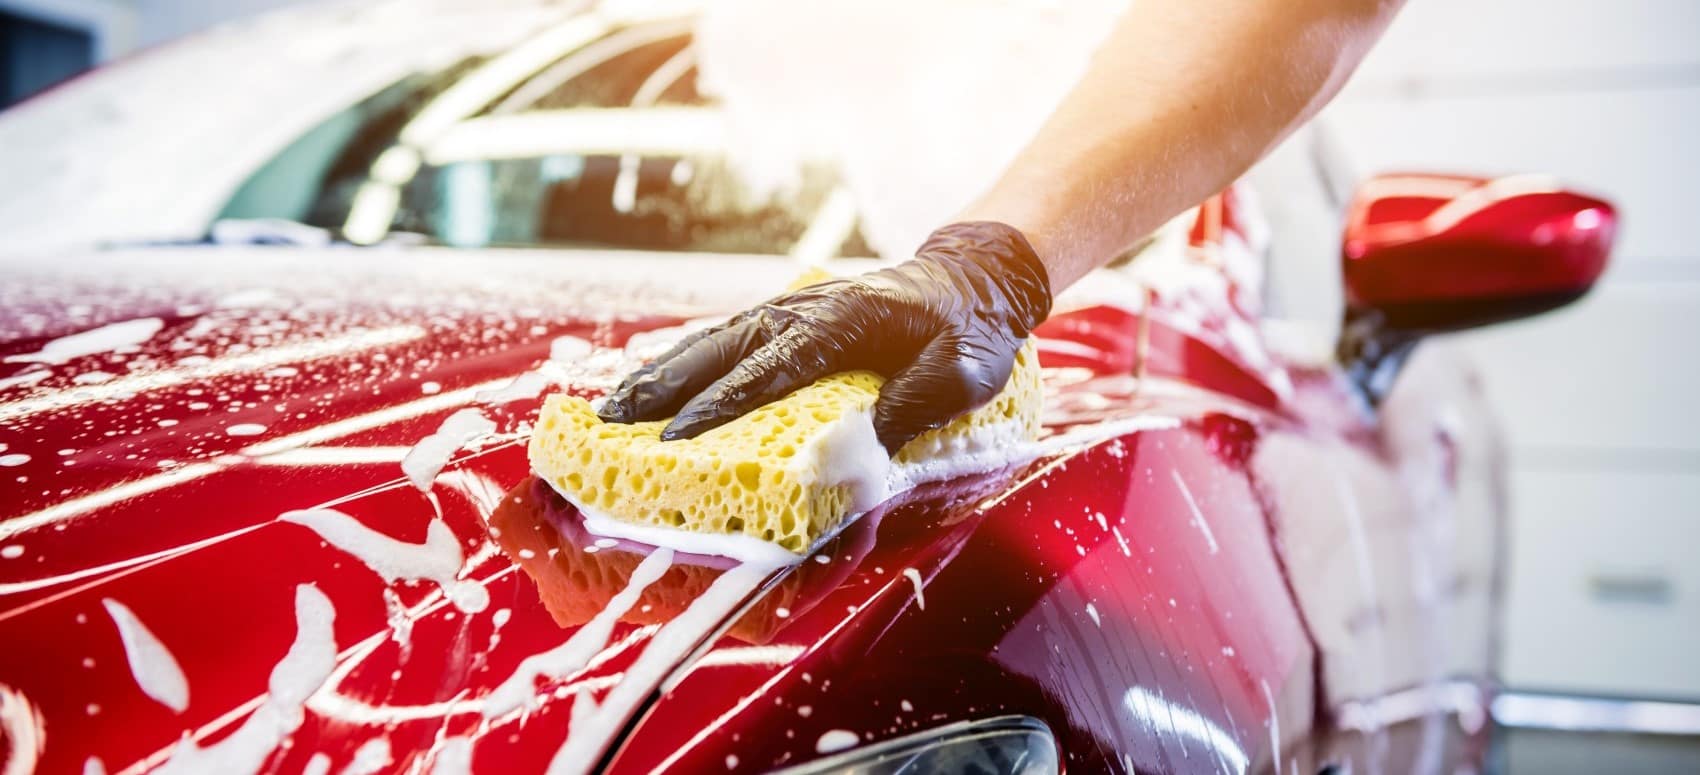 How To Properly Wash And Wax Your Car